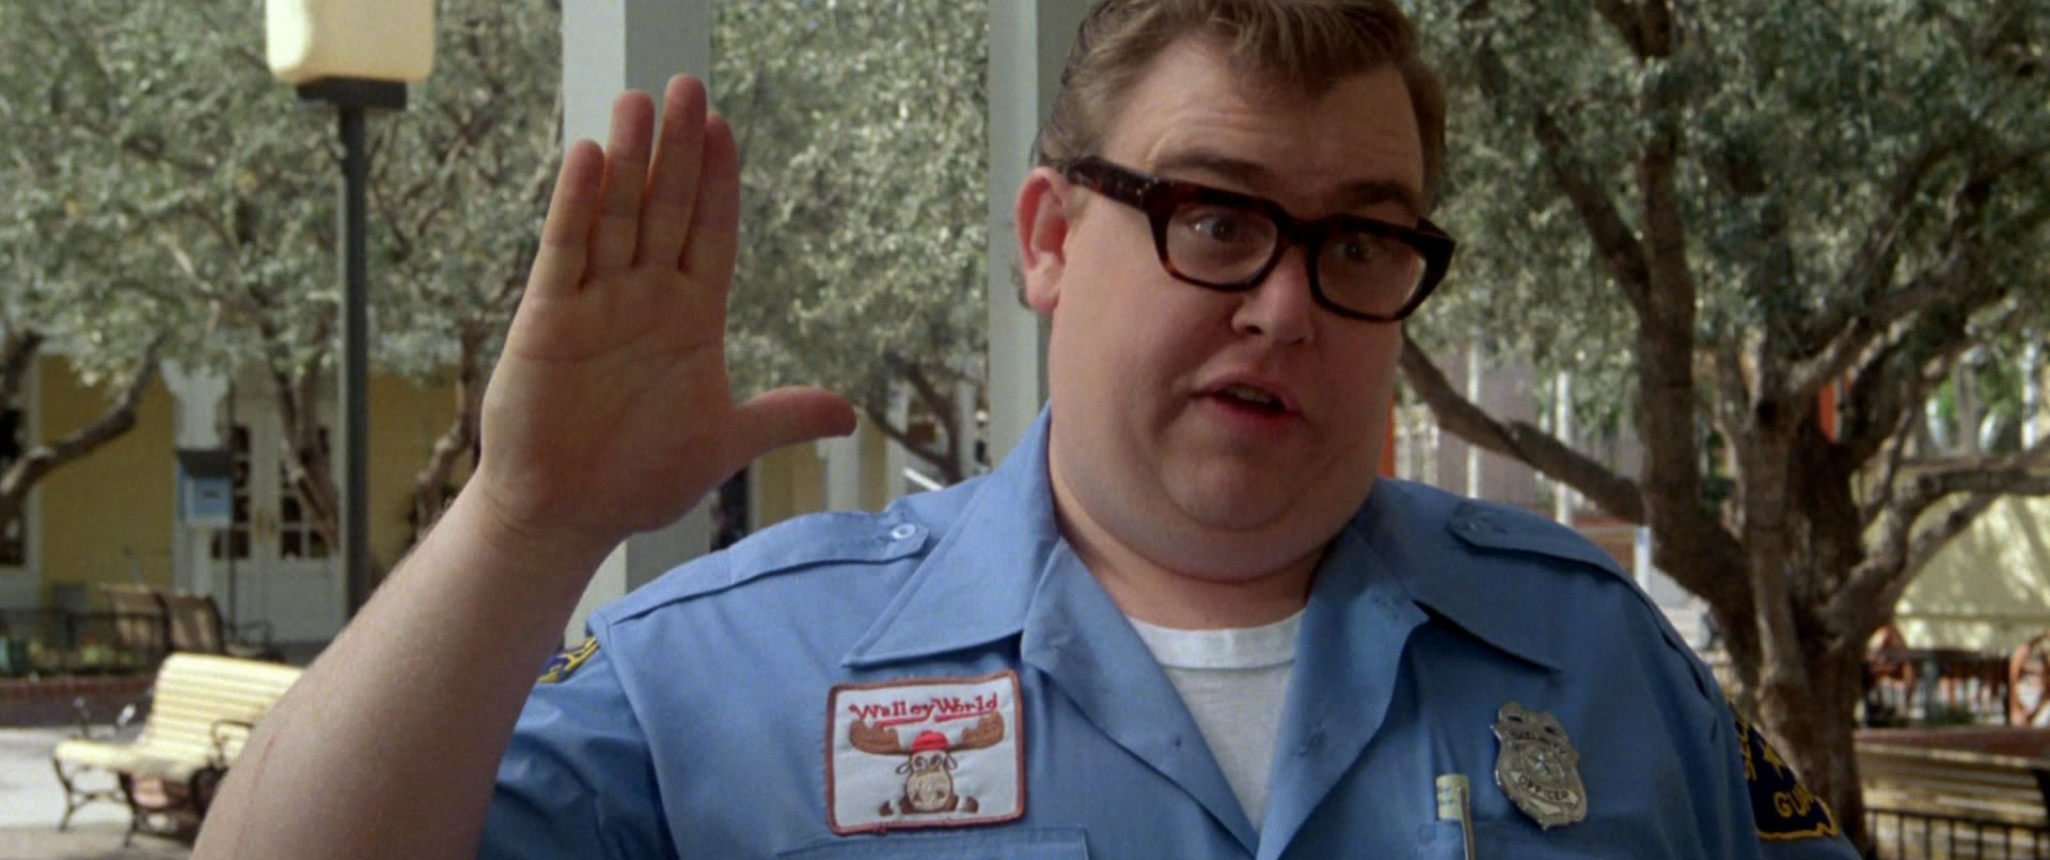 John Candy delivers bad news